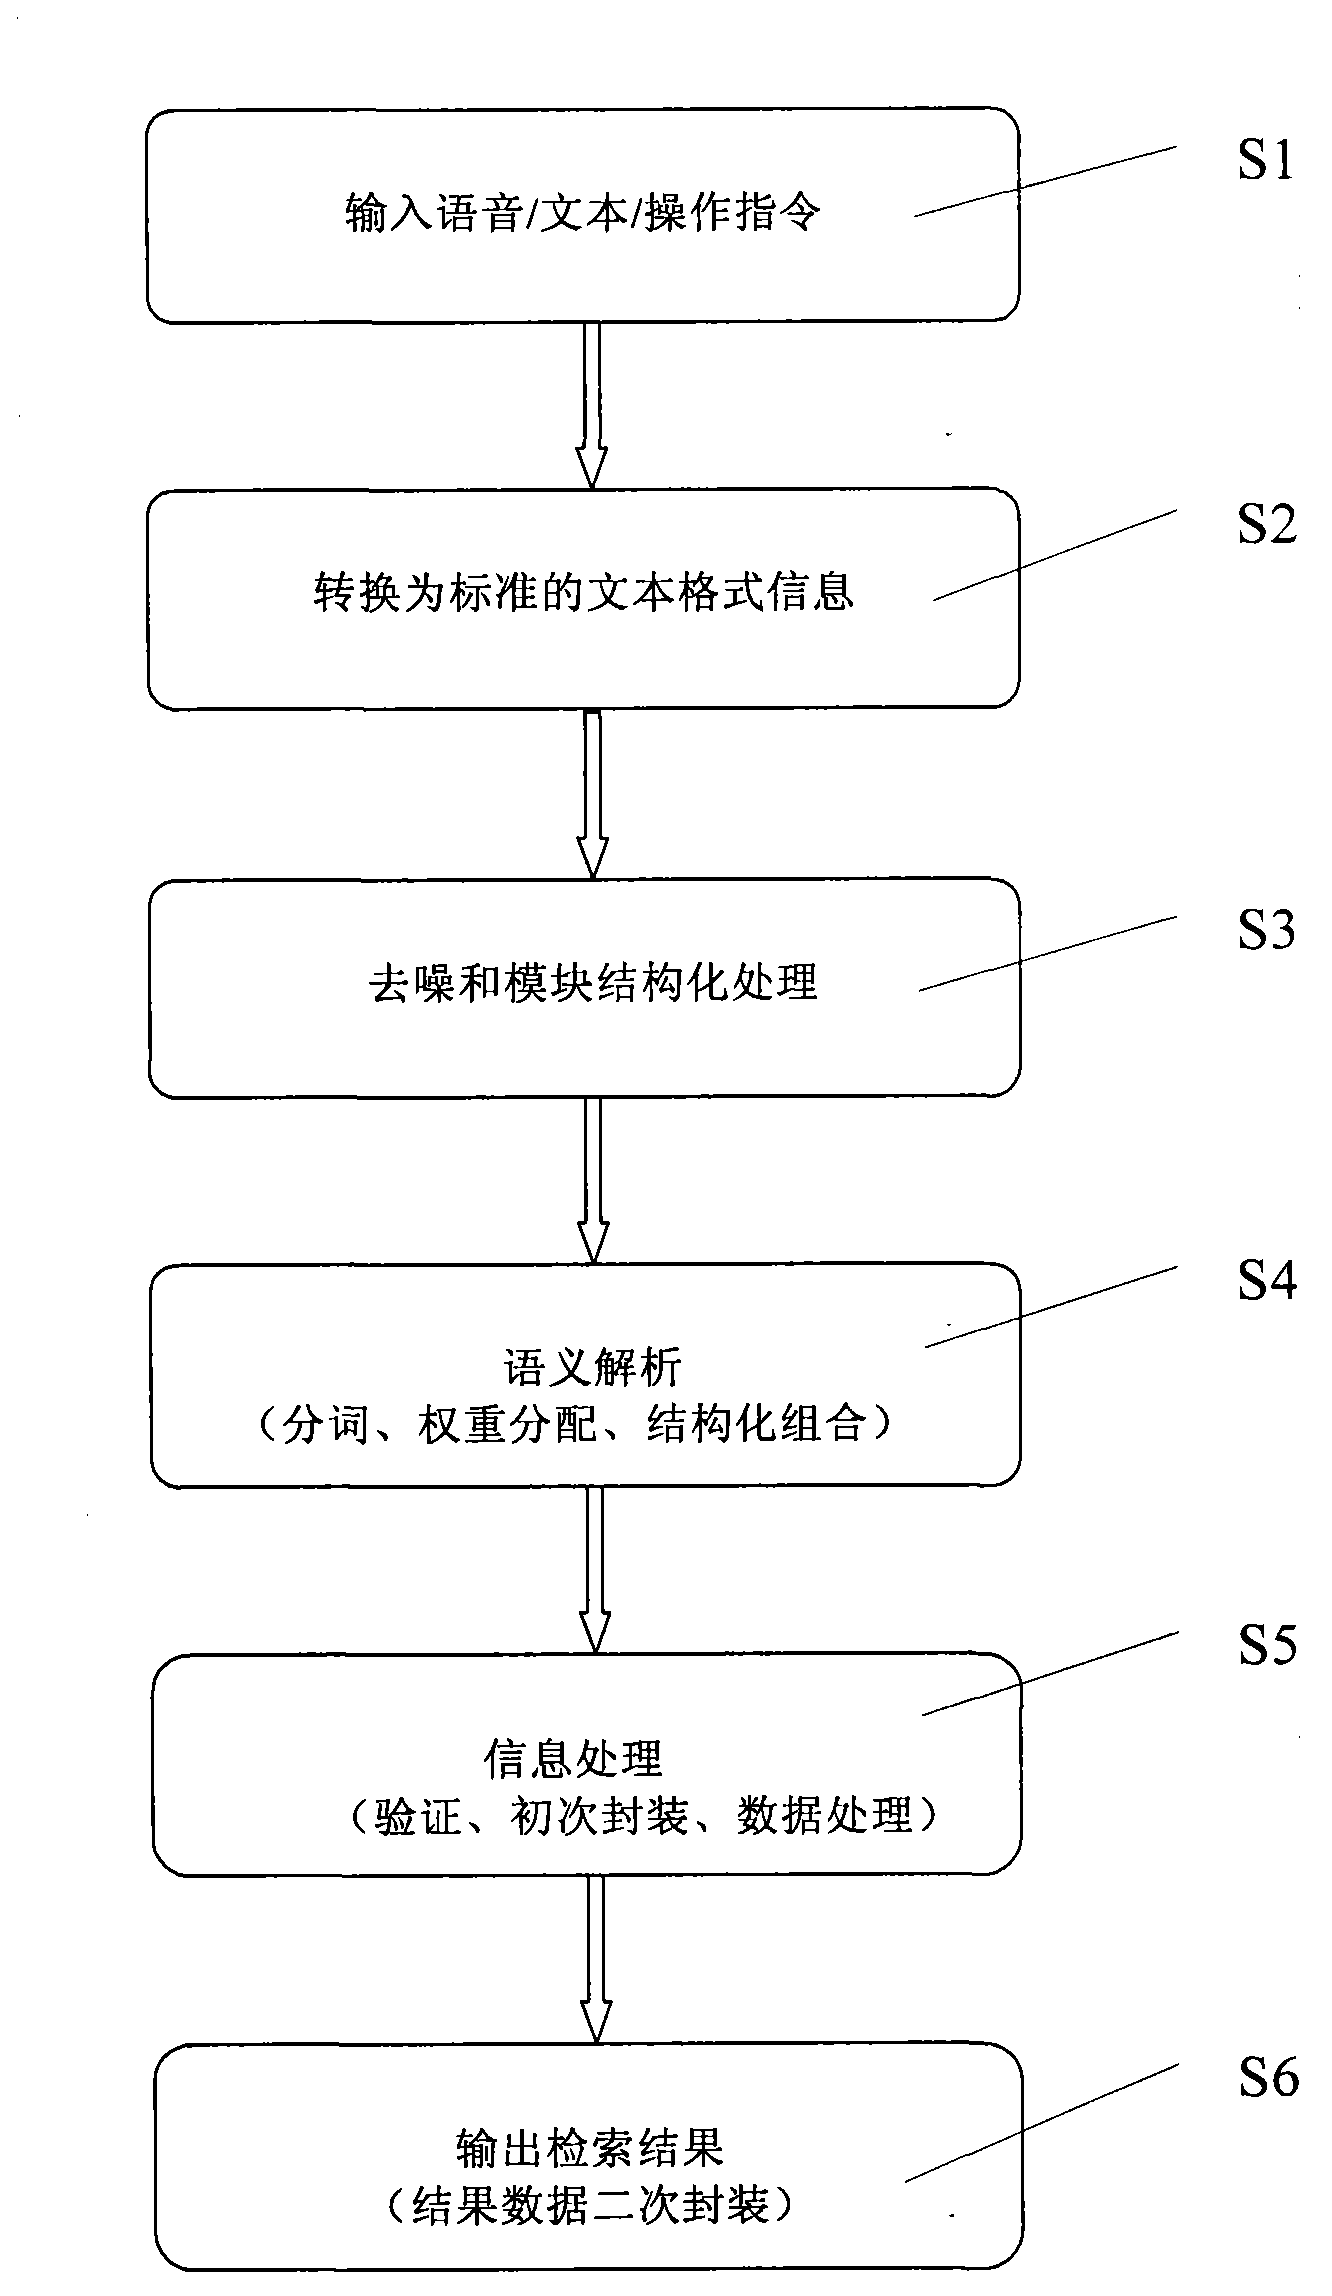 Mobile terminal based smart question answering interaction system and method